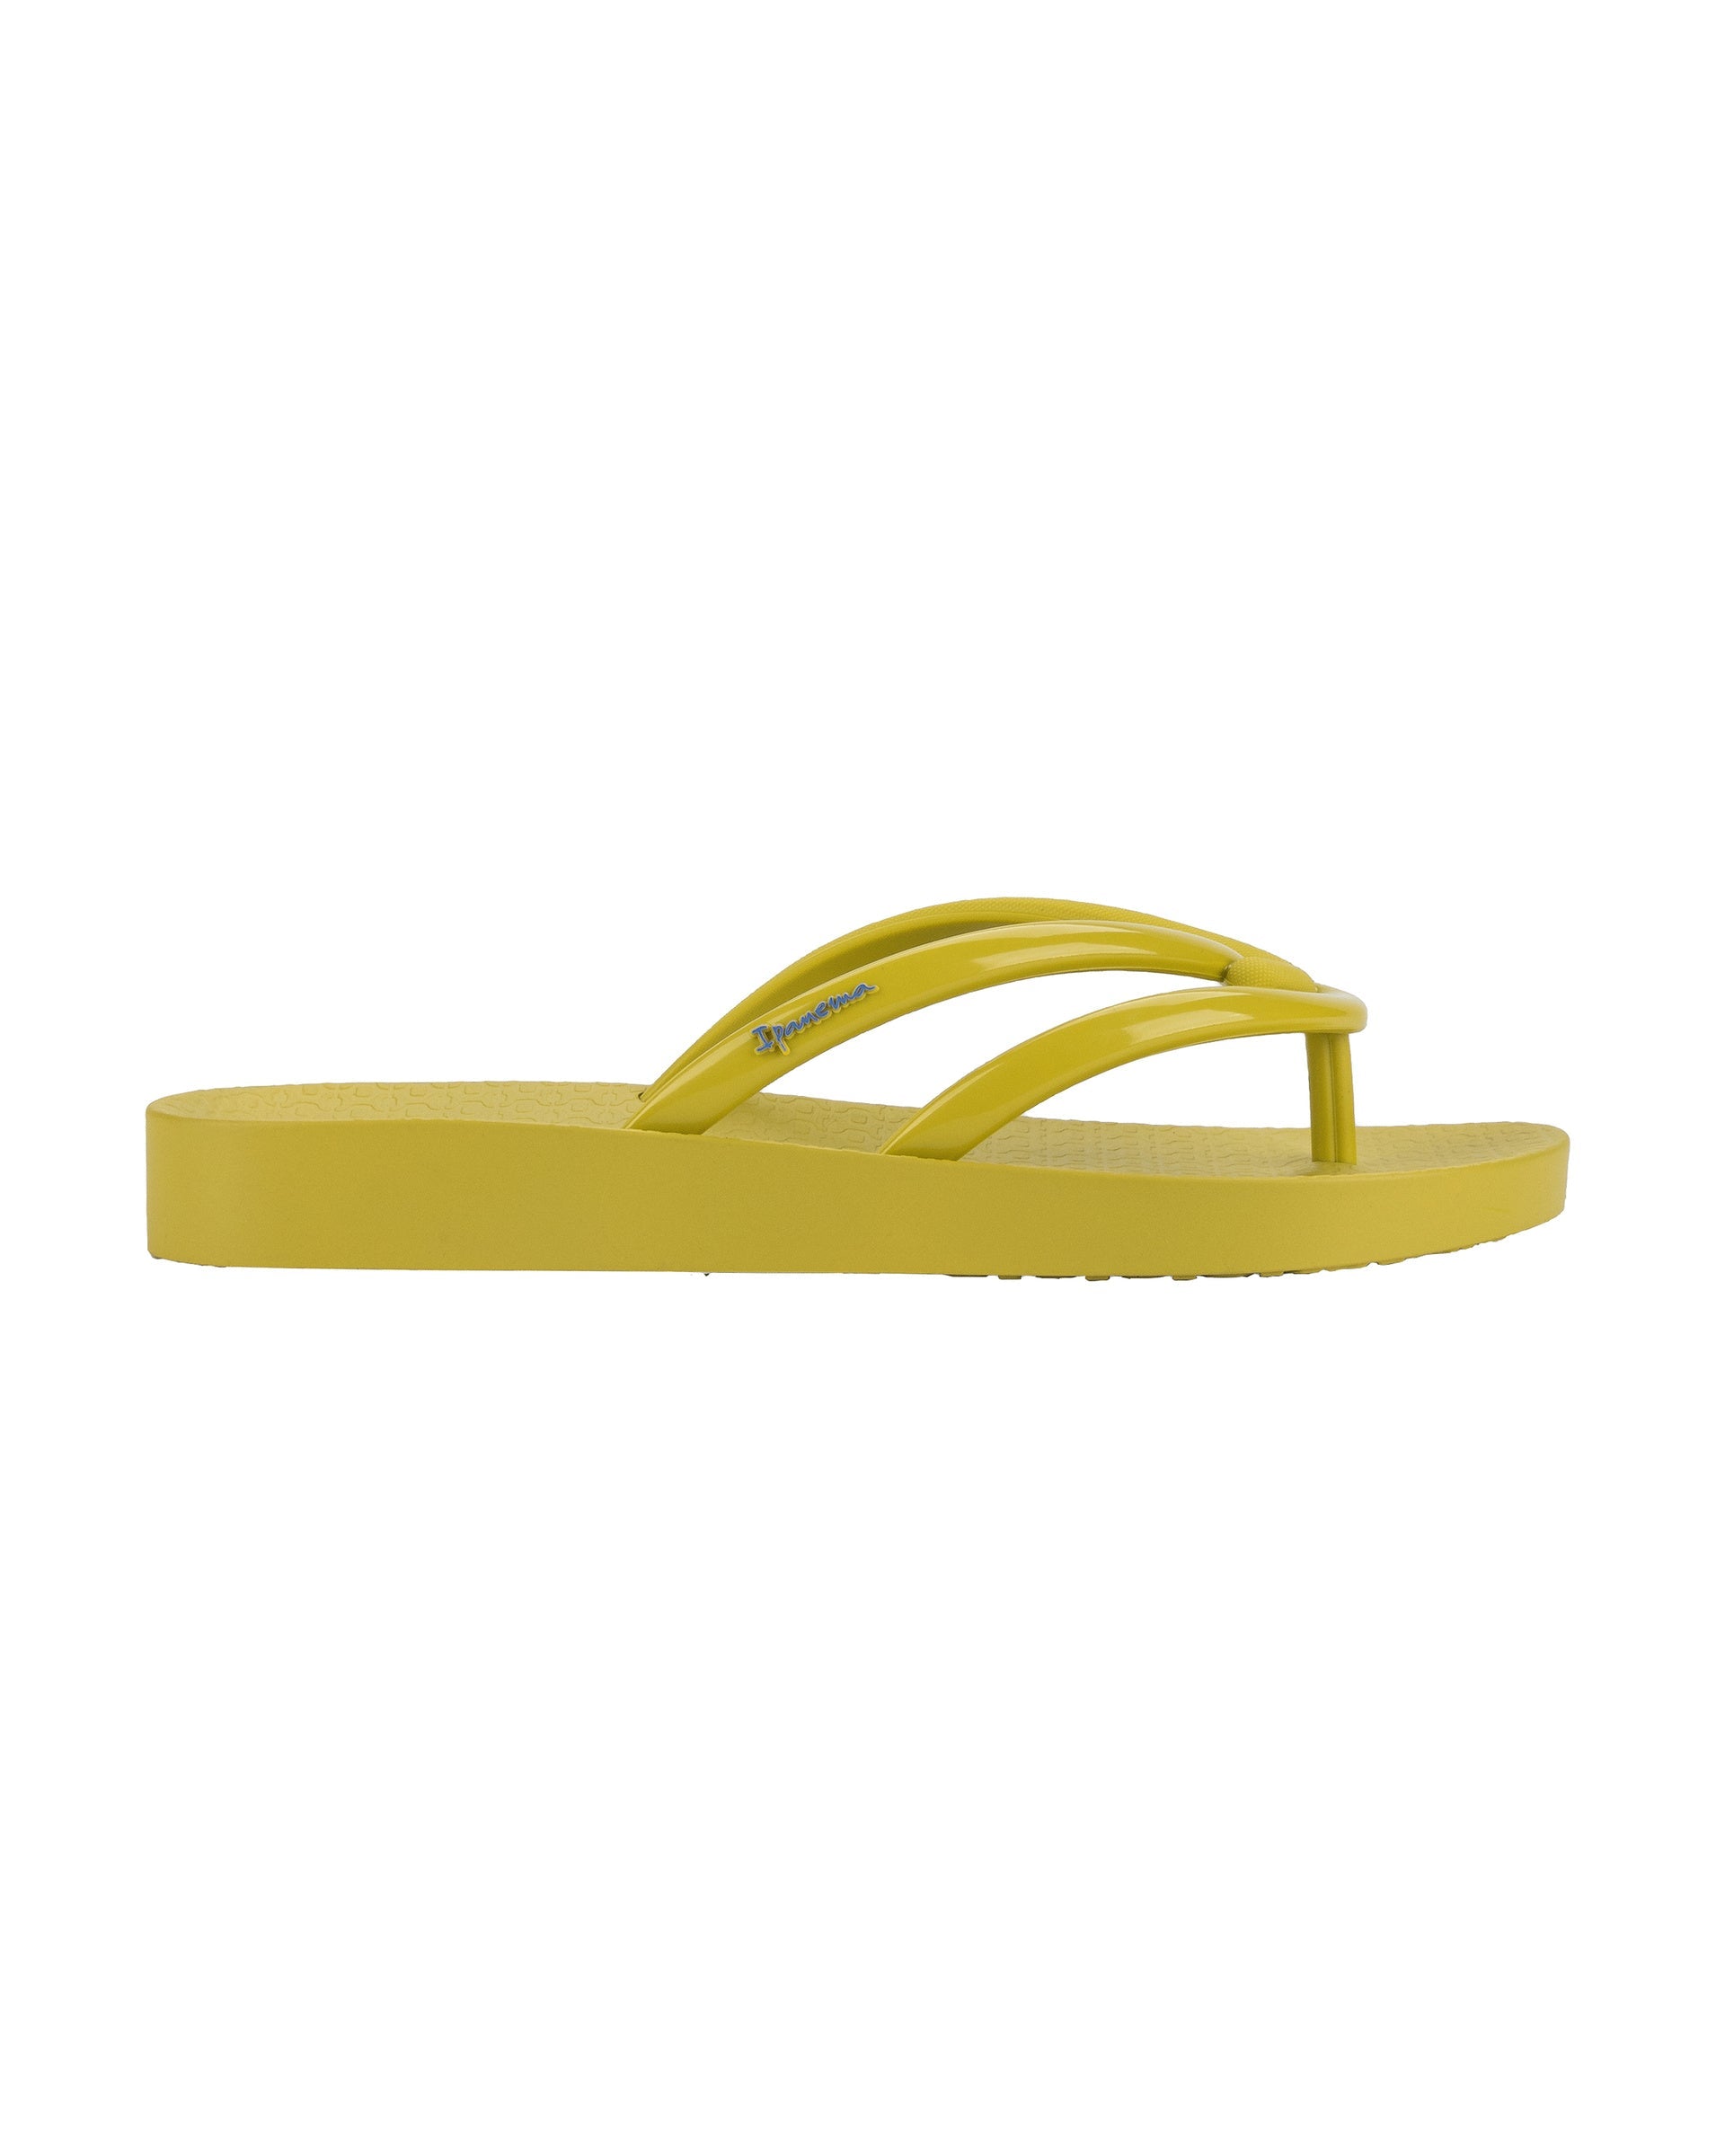 Outer side view of a green Ipanema Comfy women's flip flop.